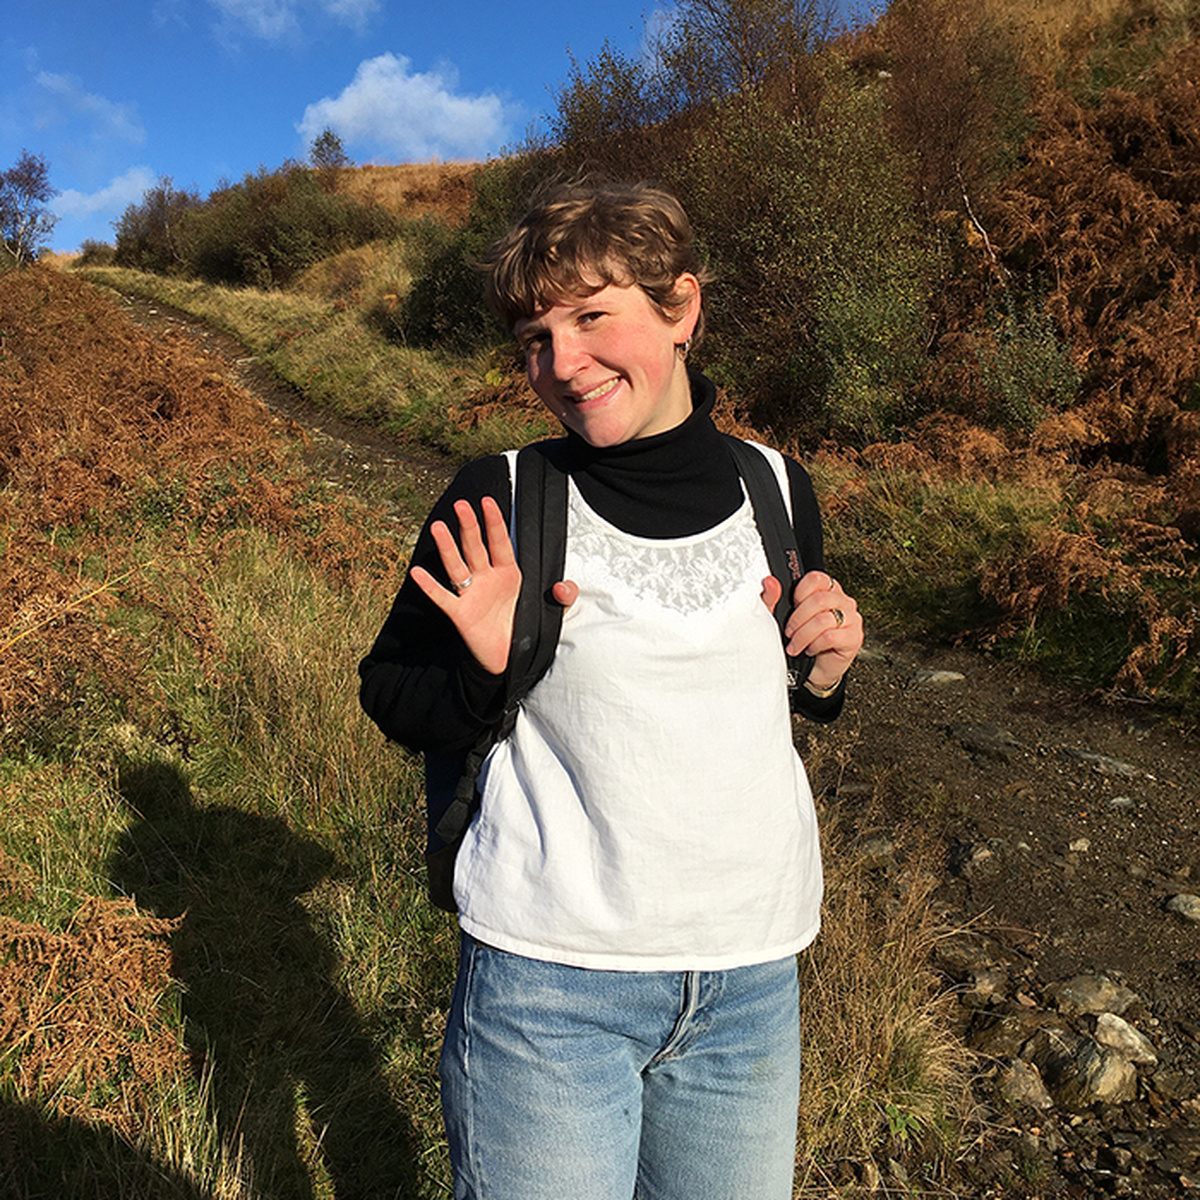 Anna Vlassova smile and waves at the camera in a rugged moorland setting.